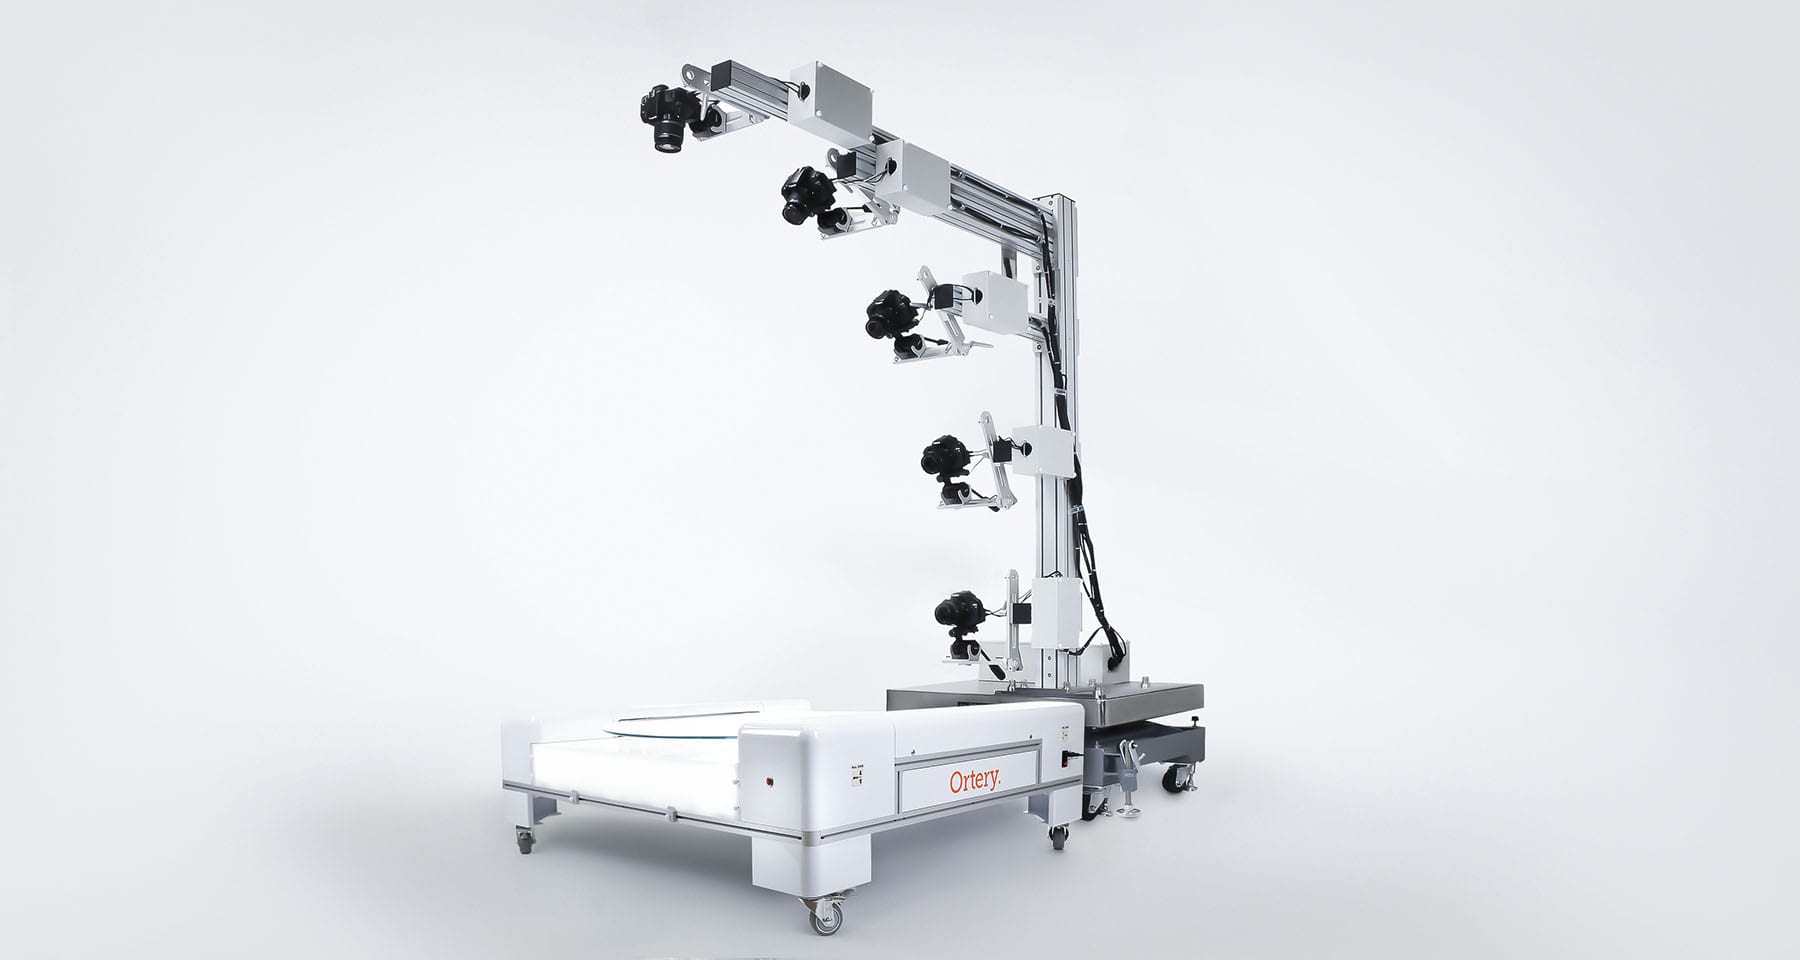 Add an Ortery 360 turntable to our 3D MultiArm system to create and automate 3D product photography